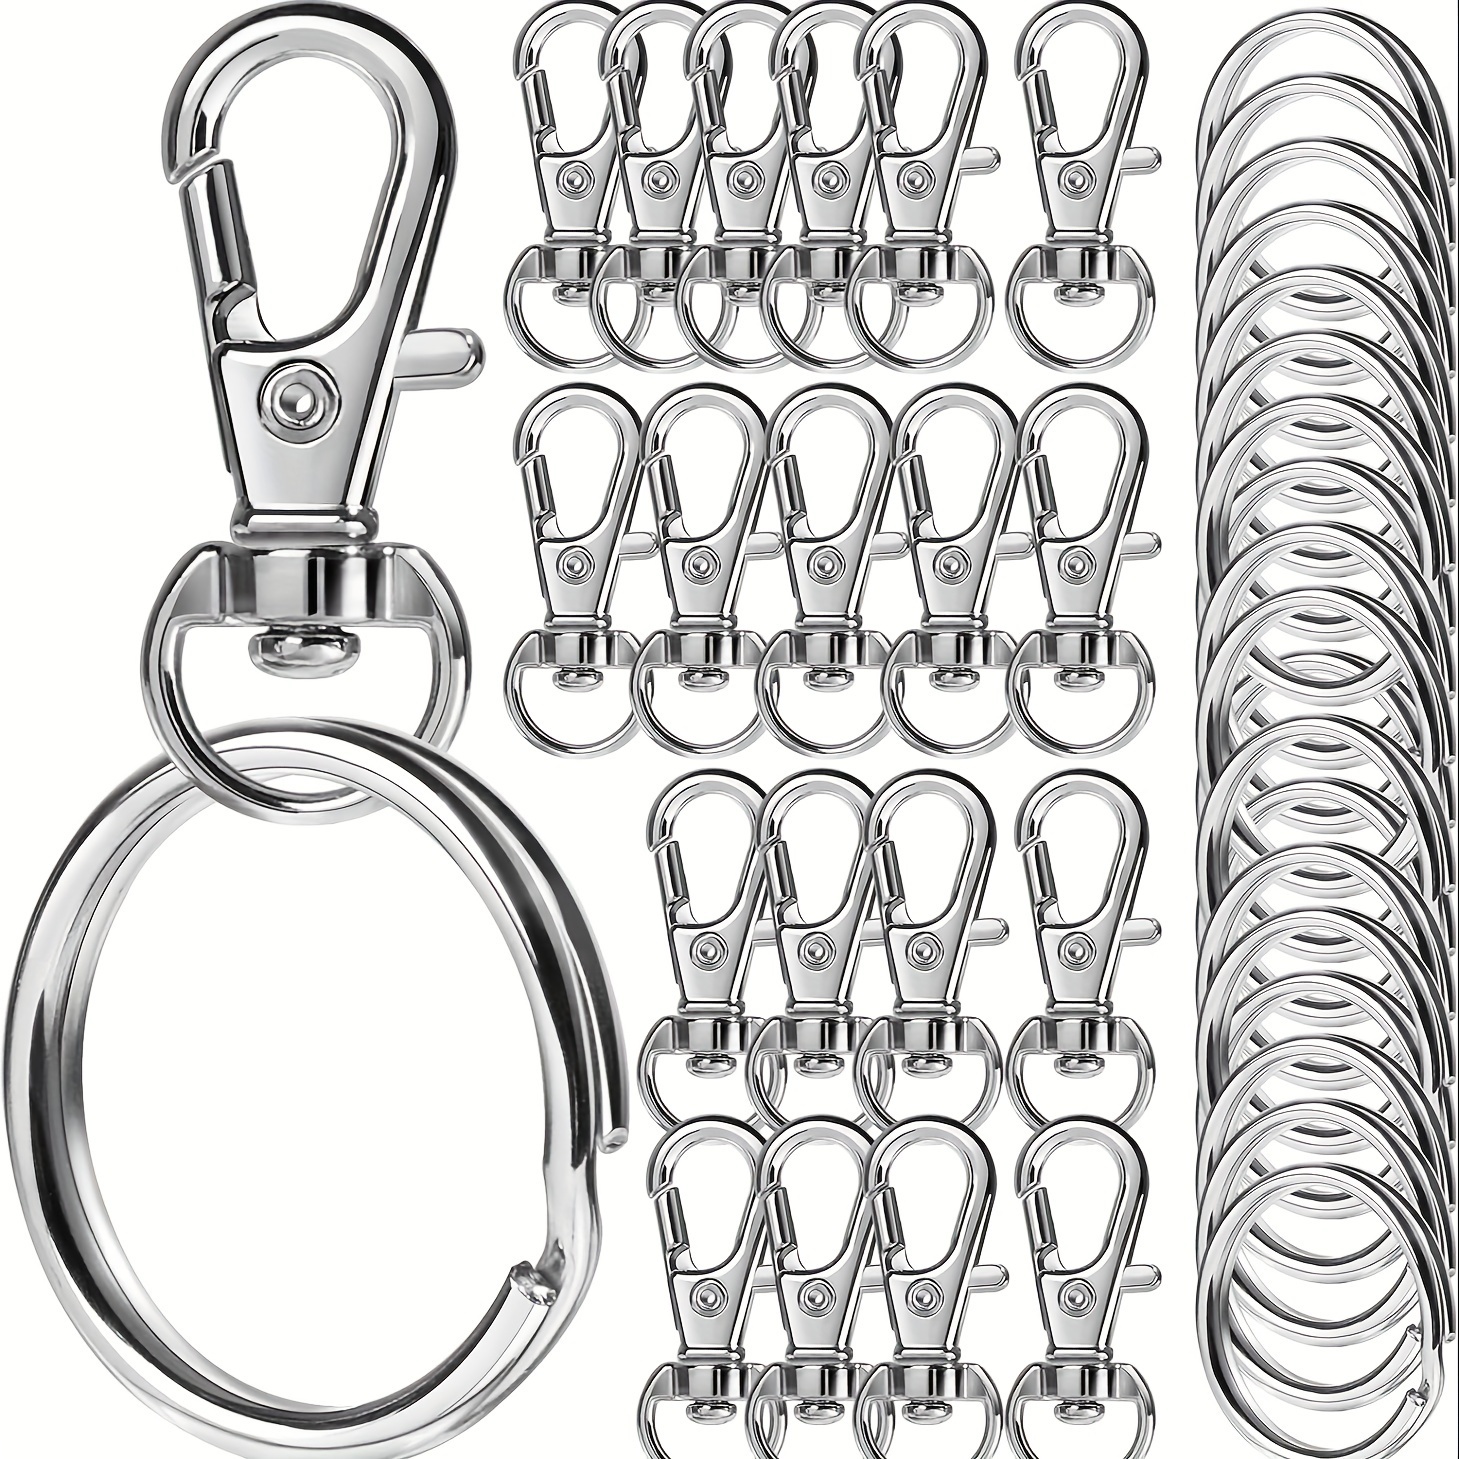 

40pcs Diy Keychain Making Supplies Set Zinc Alloy Lobster Clasp, Spring Keychain, Rotating Buckle, Hanging Rope, Snap Buckle, Keyring, Handicraft, Hardware, Luggage Accessories